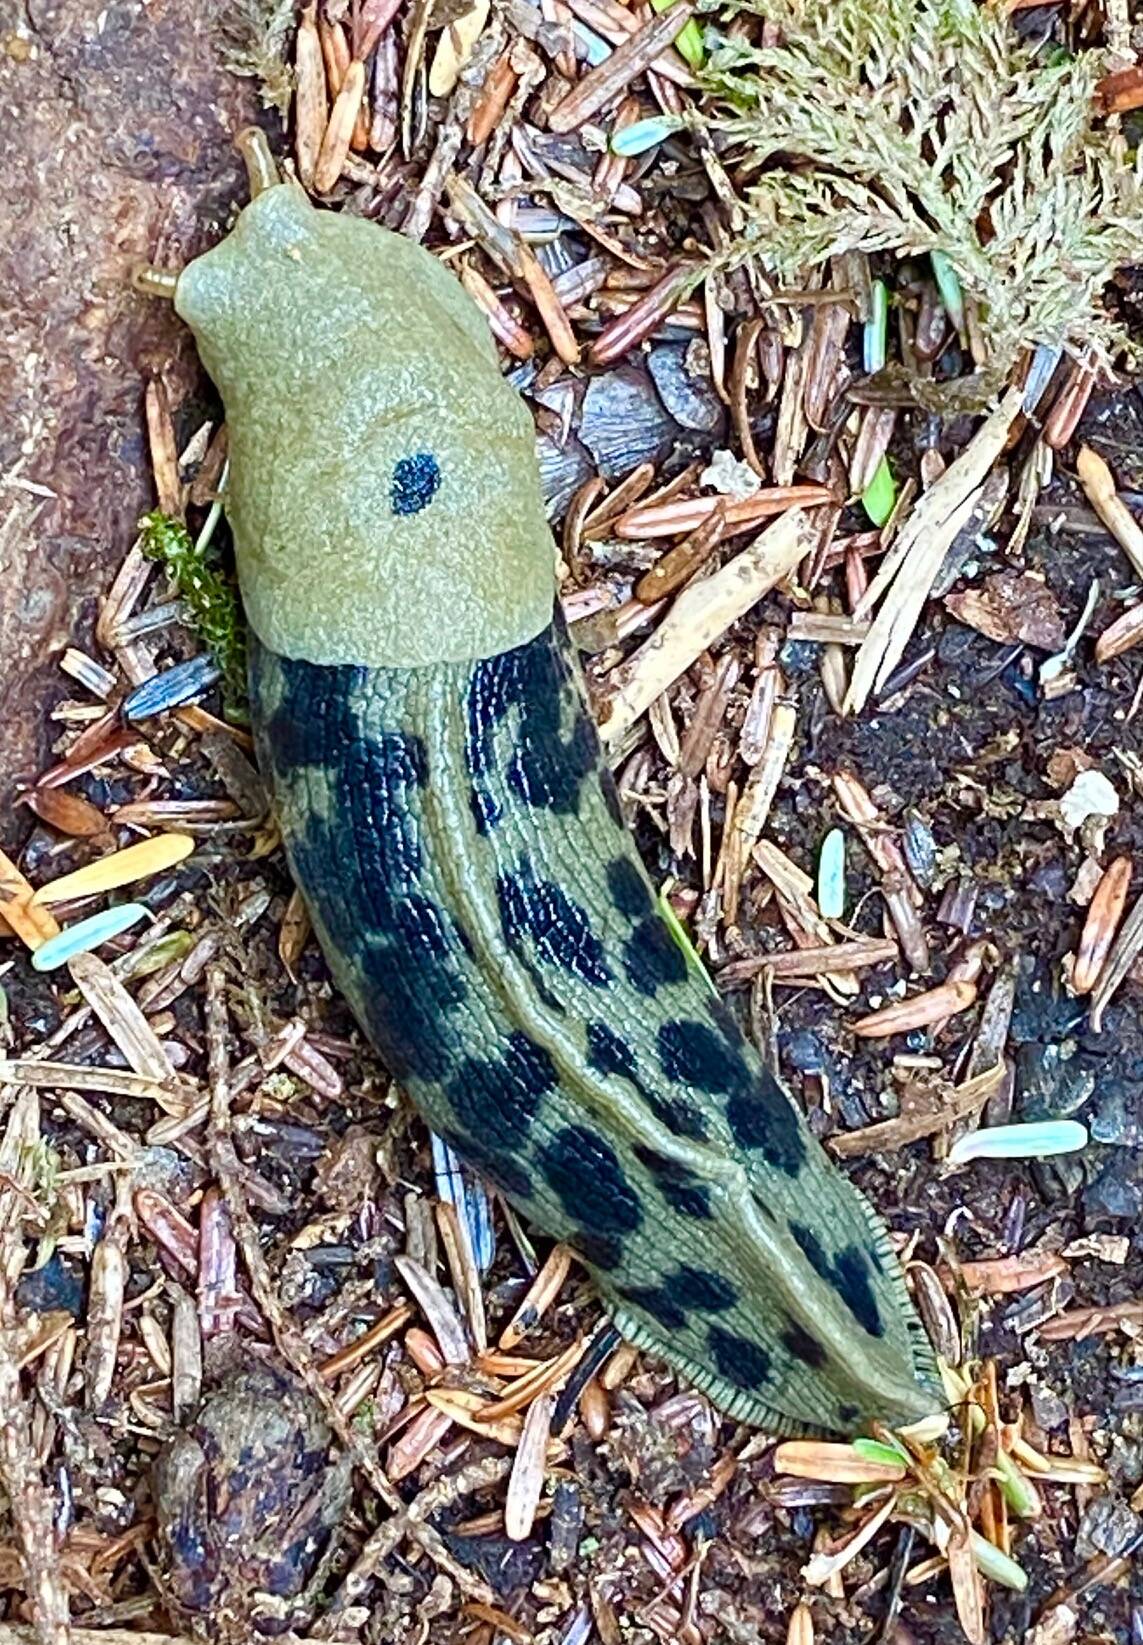 A banana slug with a single exposed lung is seen in North Bridget Cove. (Courtesy Photo / Denise Carroll)